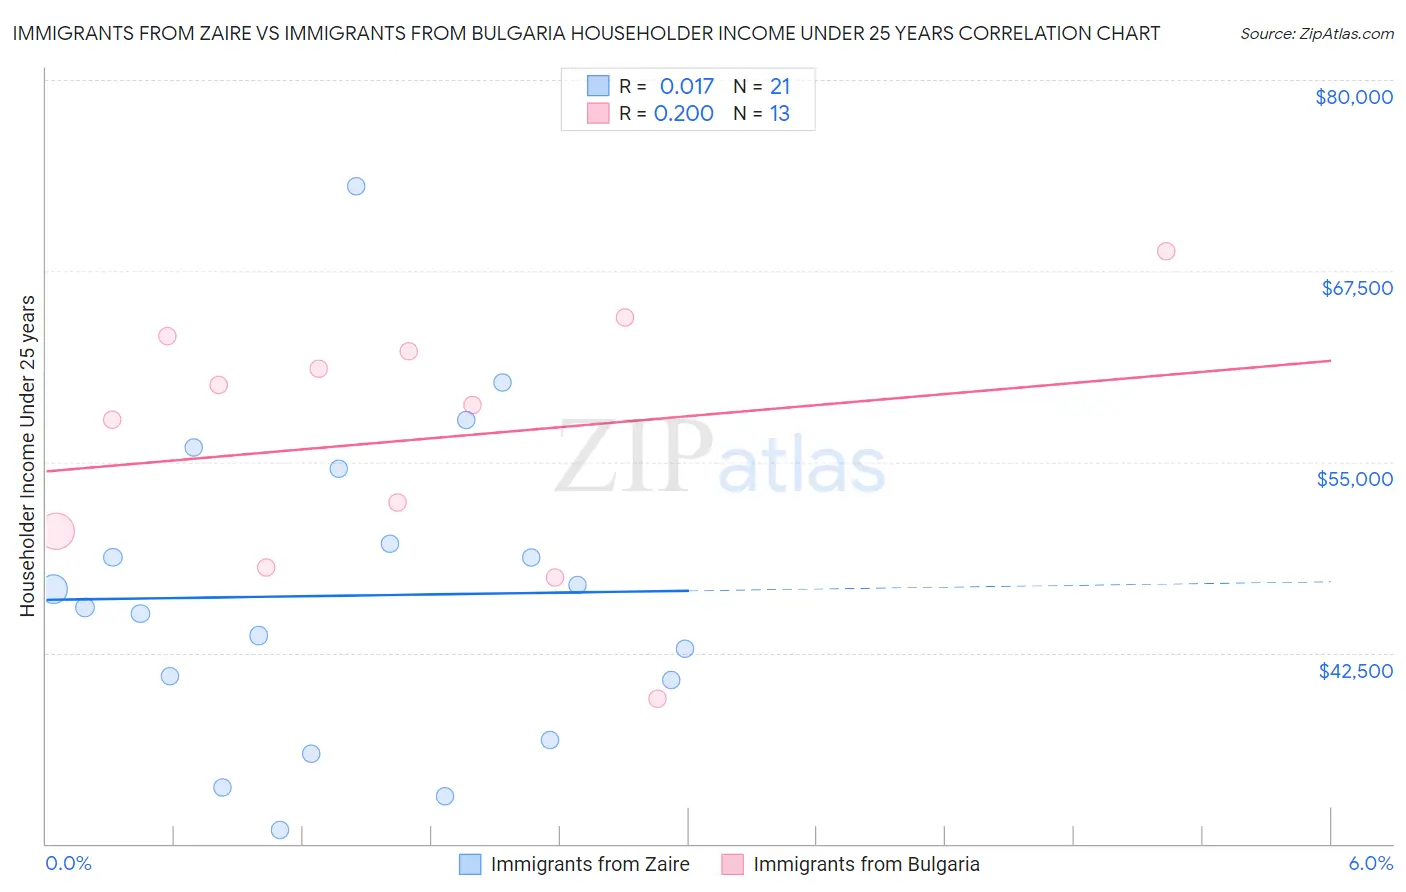 Immigrants from Zaire vs Immigrants from Bulgaria Householder Income Under 25 years